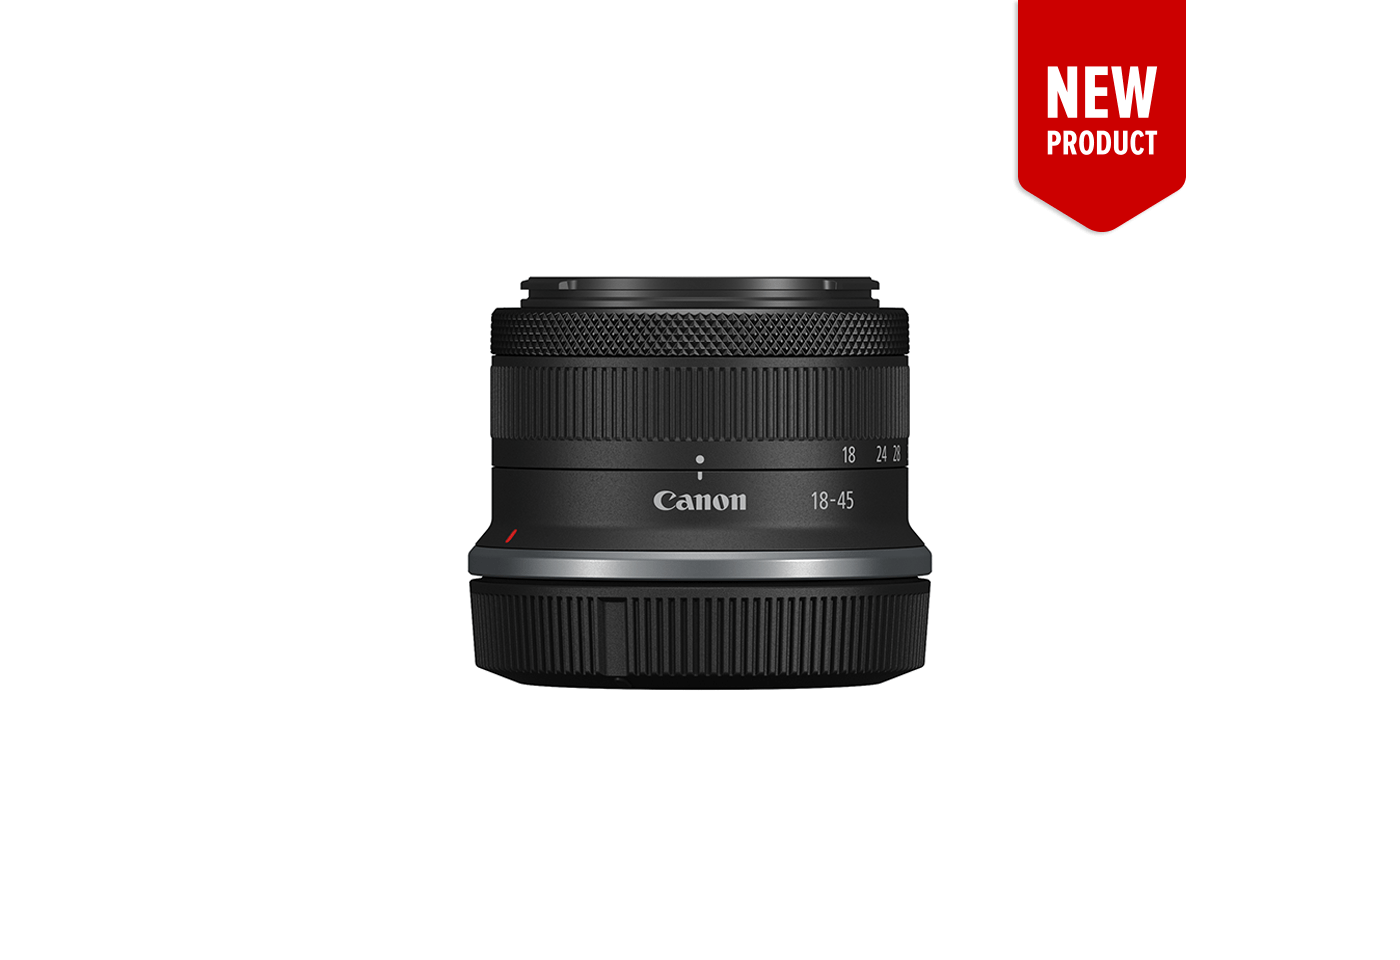 Product image of the new RF-S 18-45mm f/4.5-6.3 IS STM standard zoom lens